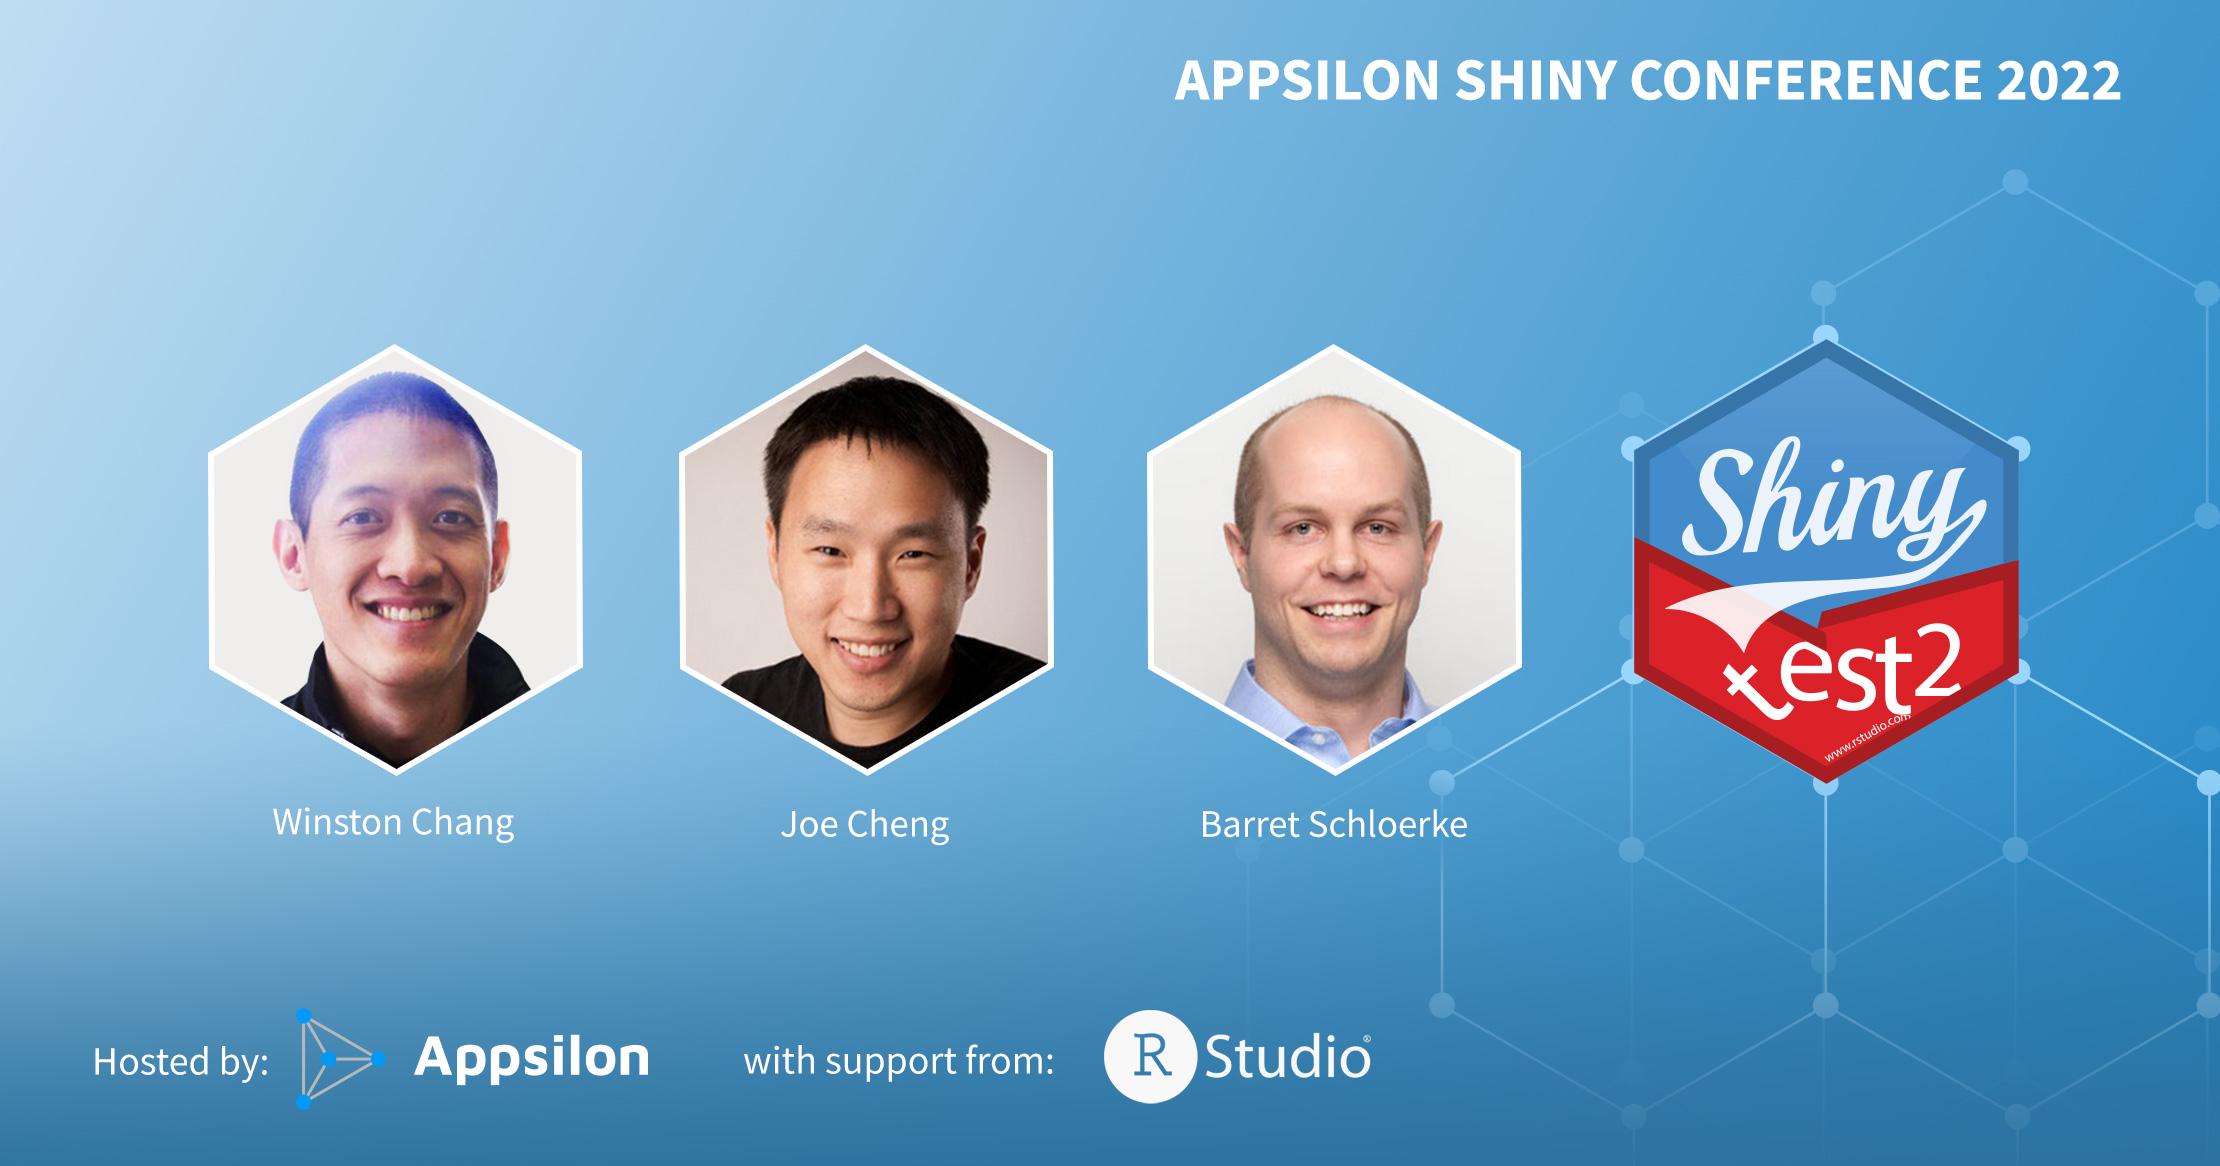 Thumbnail Headshots of Winston Chang, Joe Cheng, Barret Schloerke, and the shinytest2 hex sticker which is looks like a mashup of the Shiny hex and the testthat hex sticker. The text says Appsilon Shiny Conference 2022, hosted by Appsilon with support from RStudio.